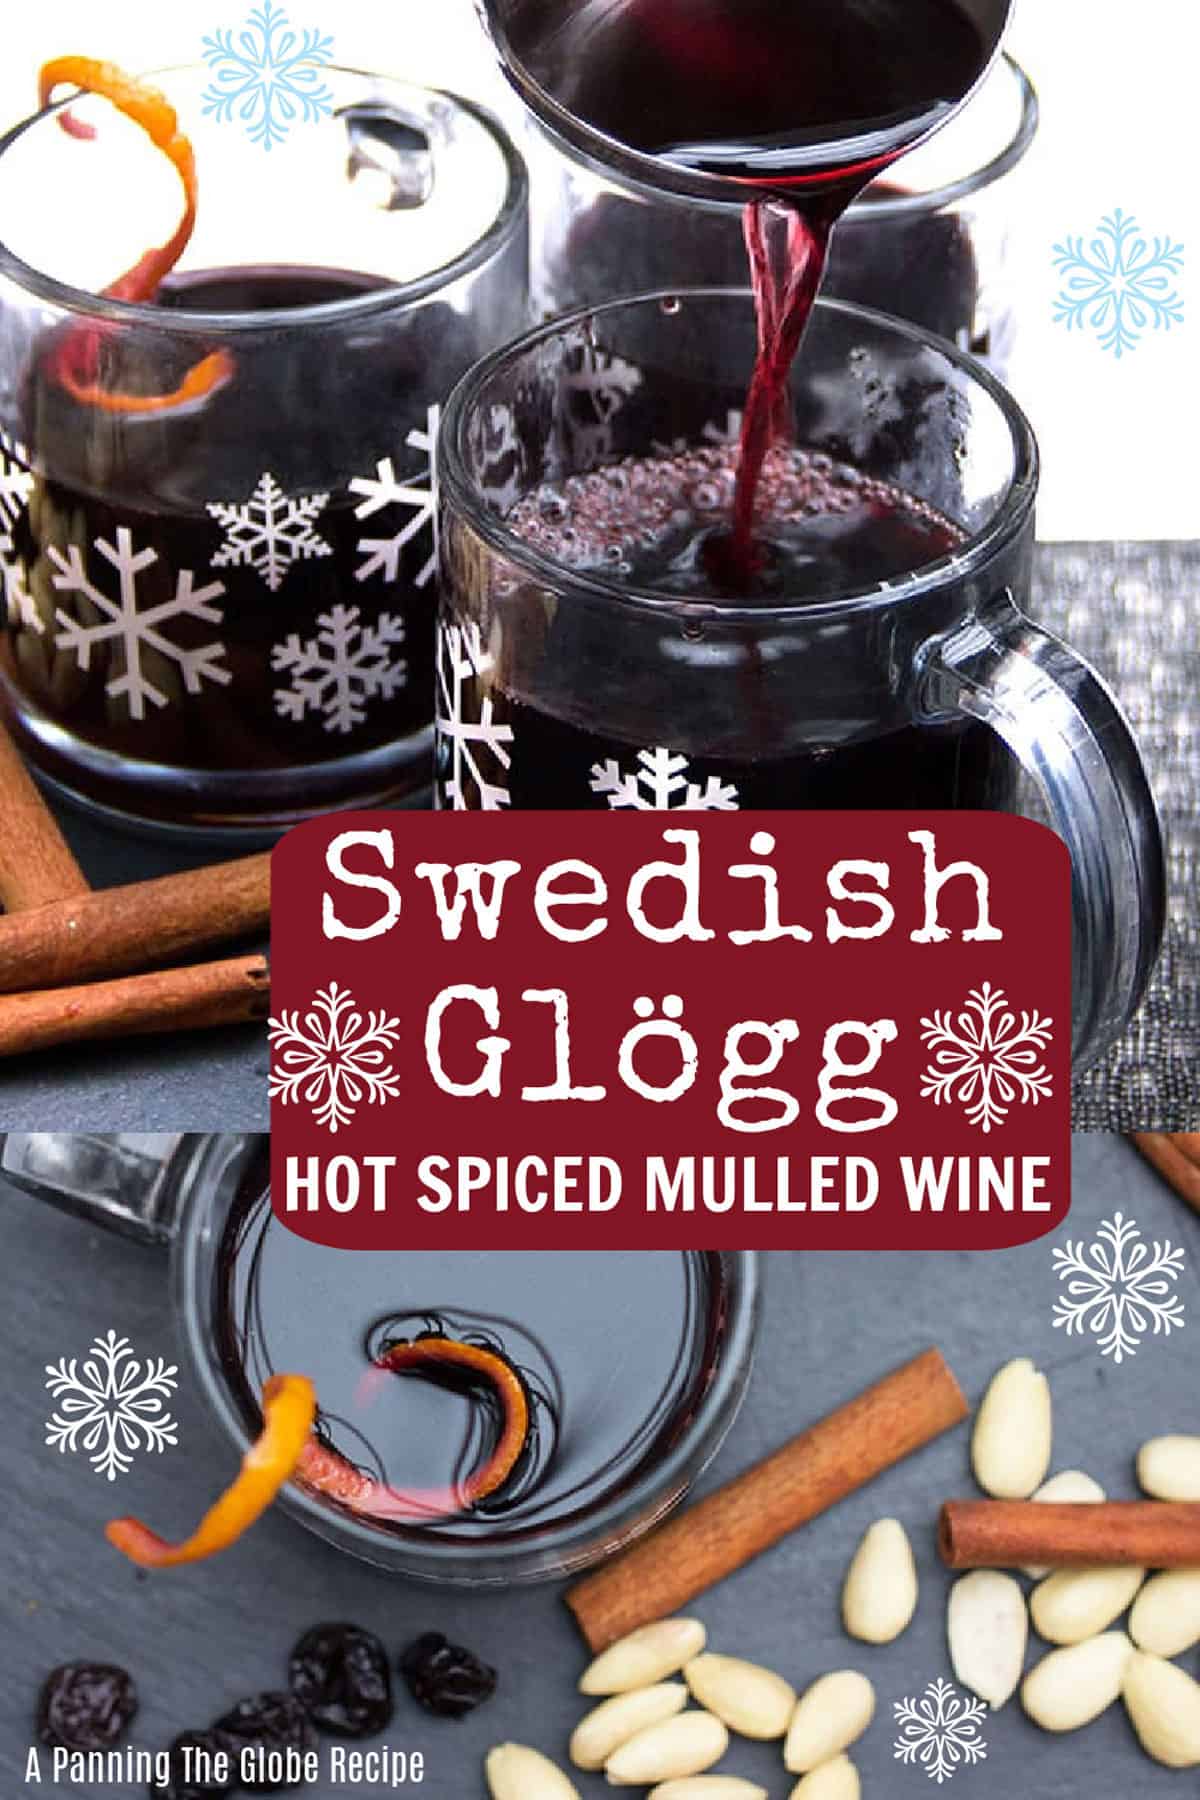 Glass snowflake-decorated mugs filled with hot spiced mulled wine, surrounded by cinnamon sticks and blanched almonds